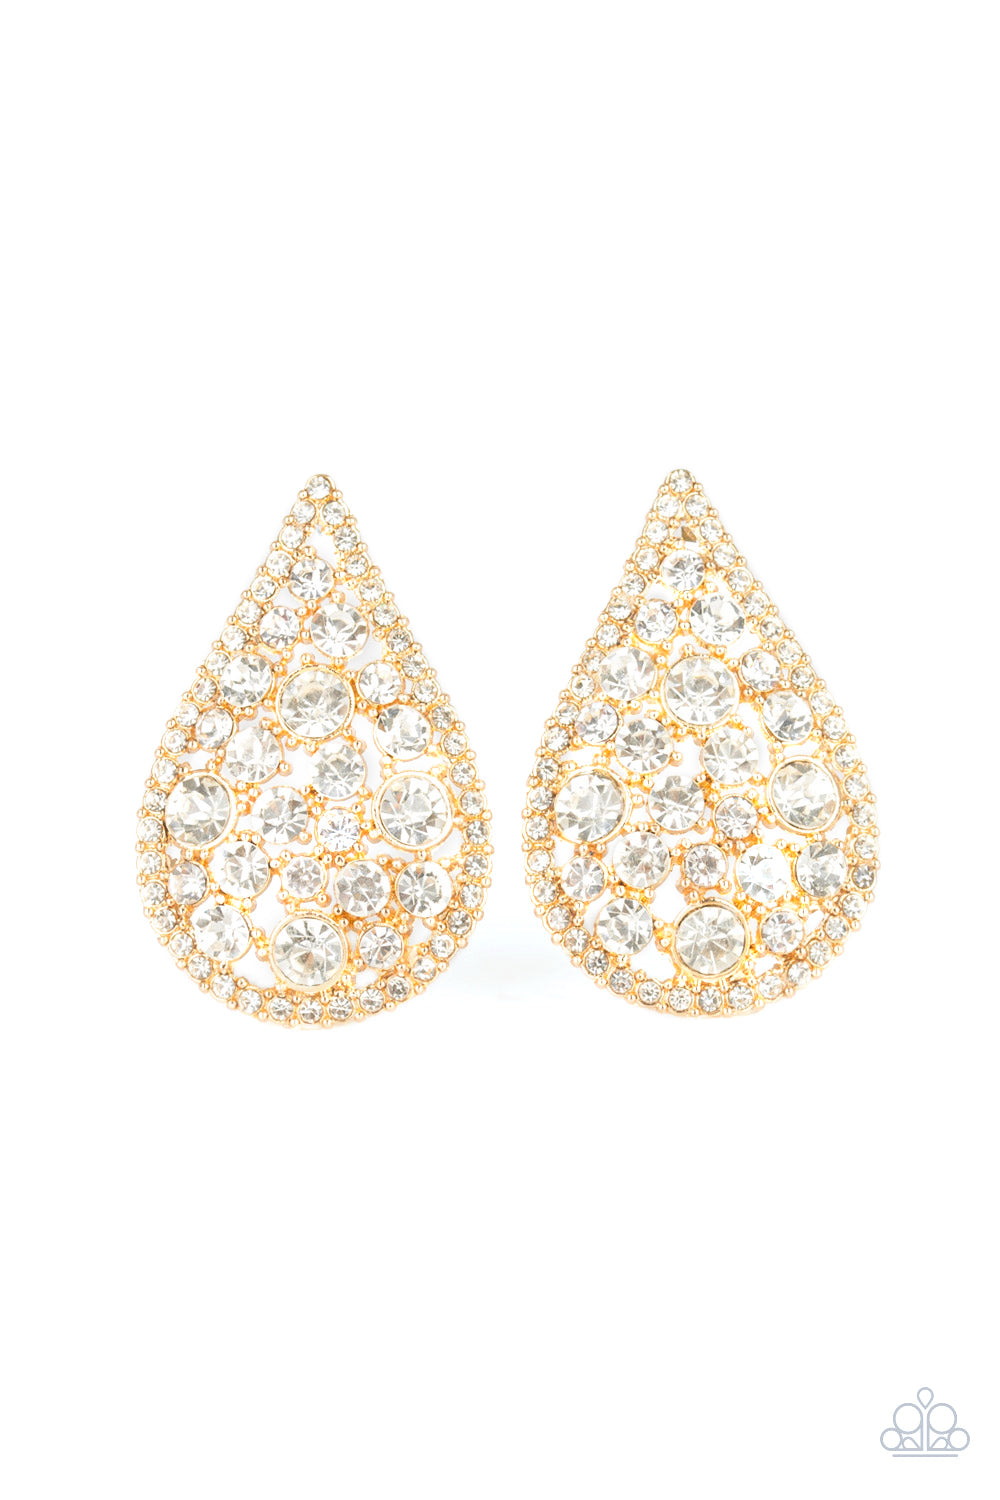 REIGN-Storm - Gold Earrings - Paparazzi Accessories 